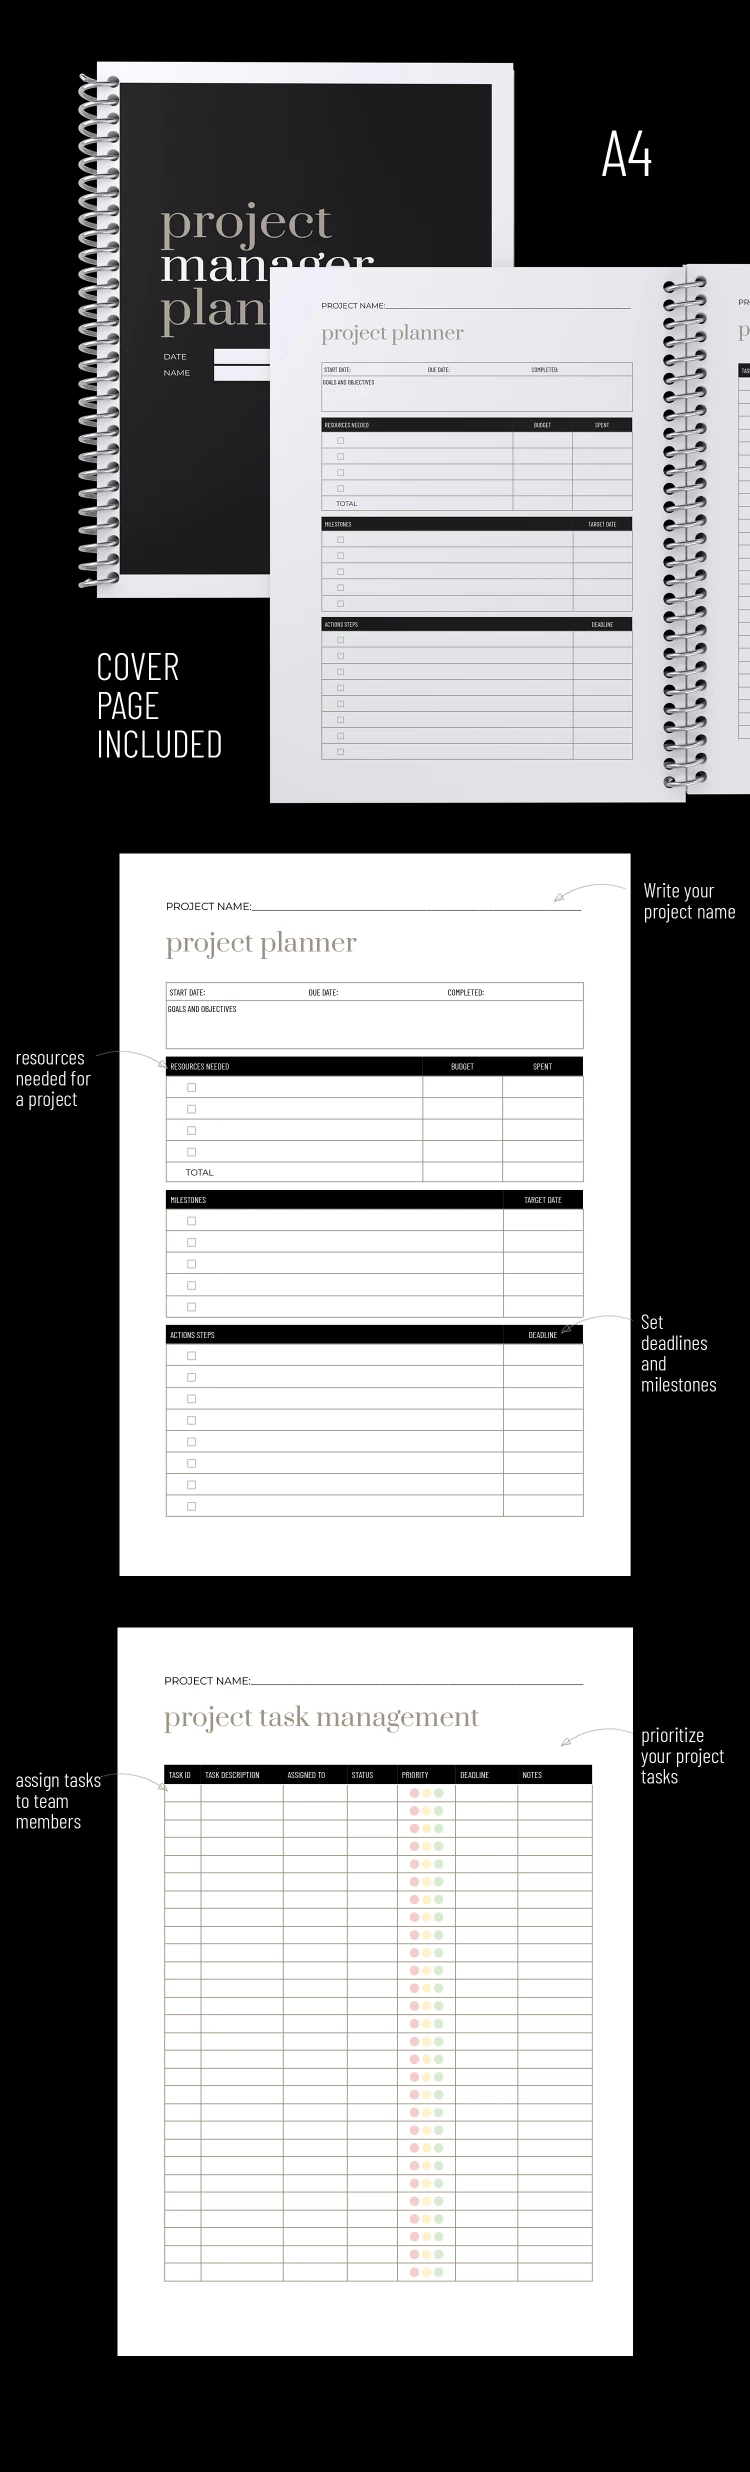 Project Planner - free Google Docs Template - 10068826